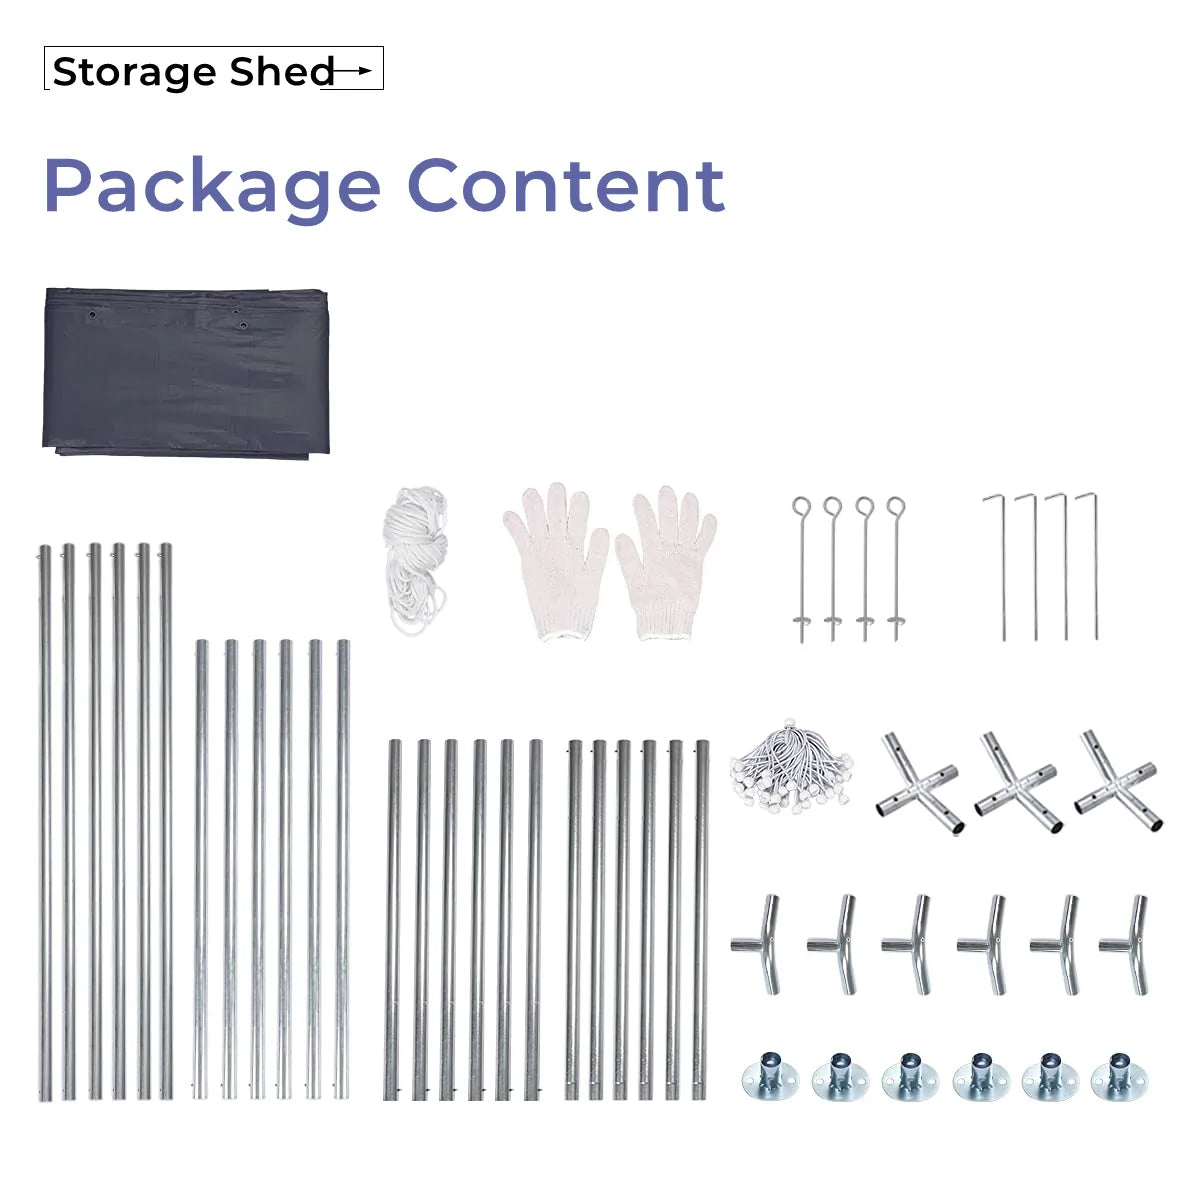 storage shed package content